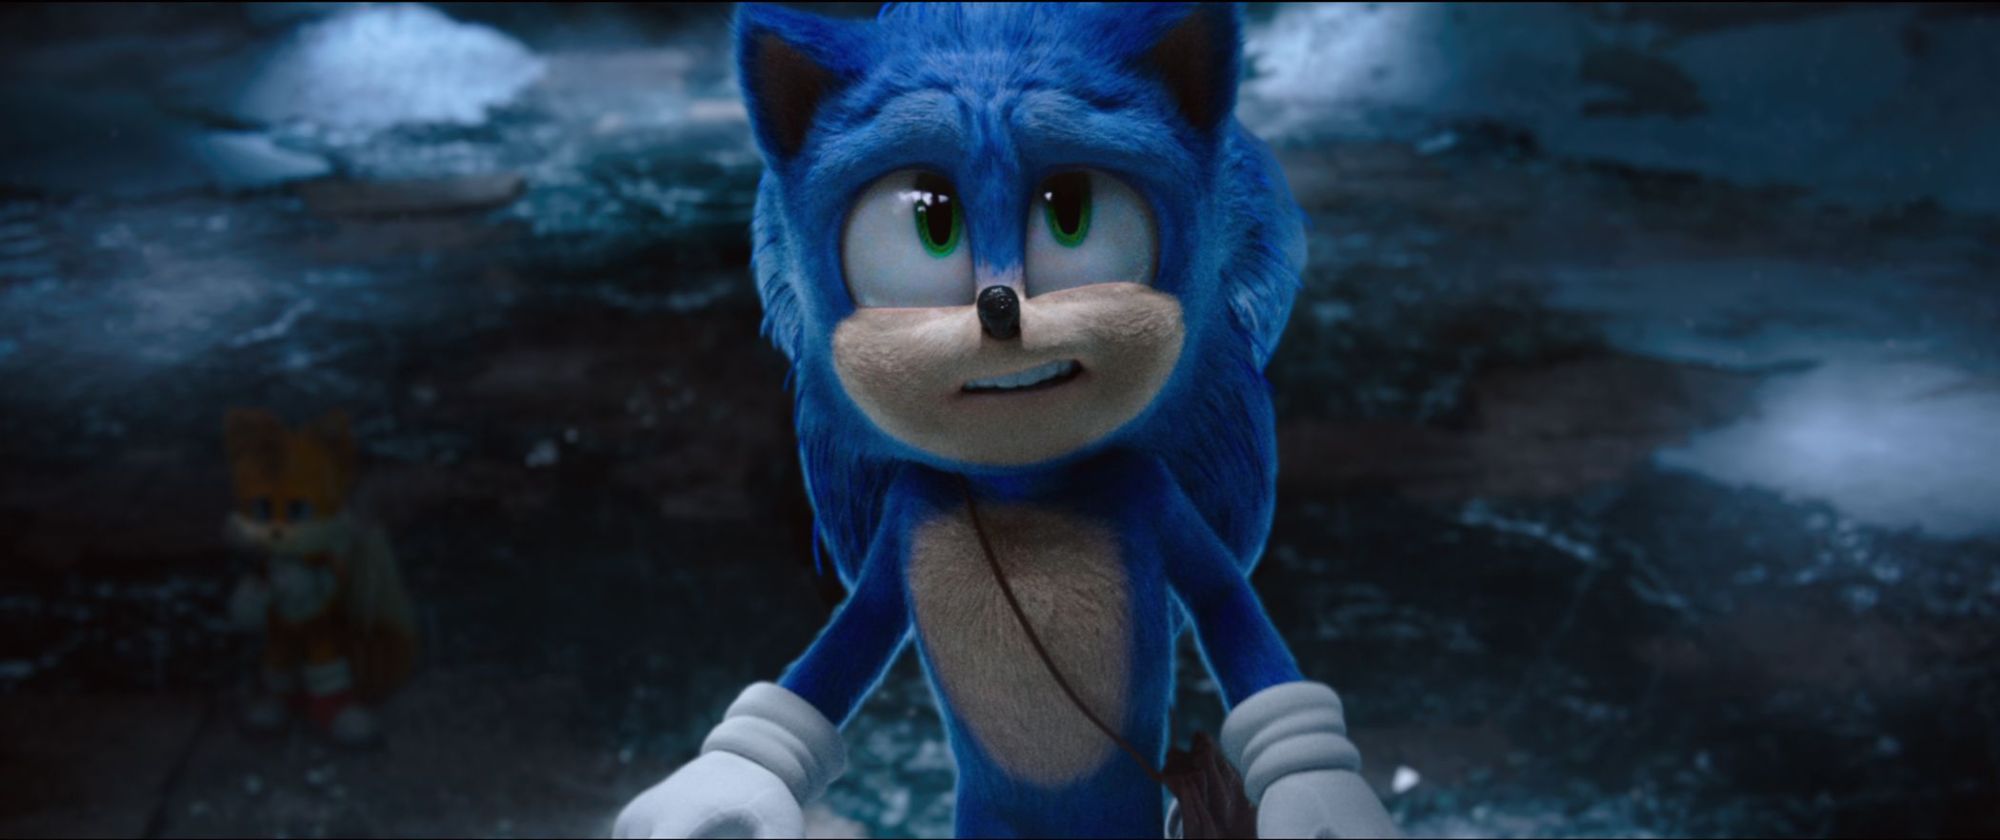 Sonic the Hedgehog 2' runs away with domestic box office